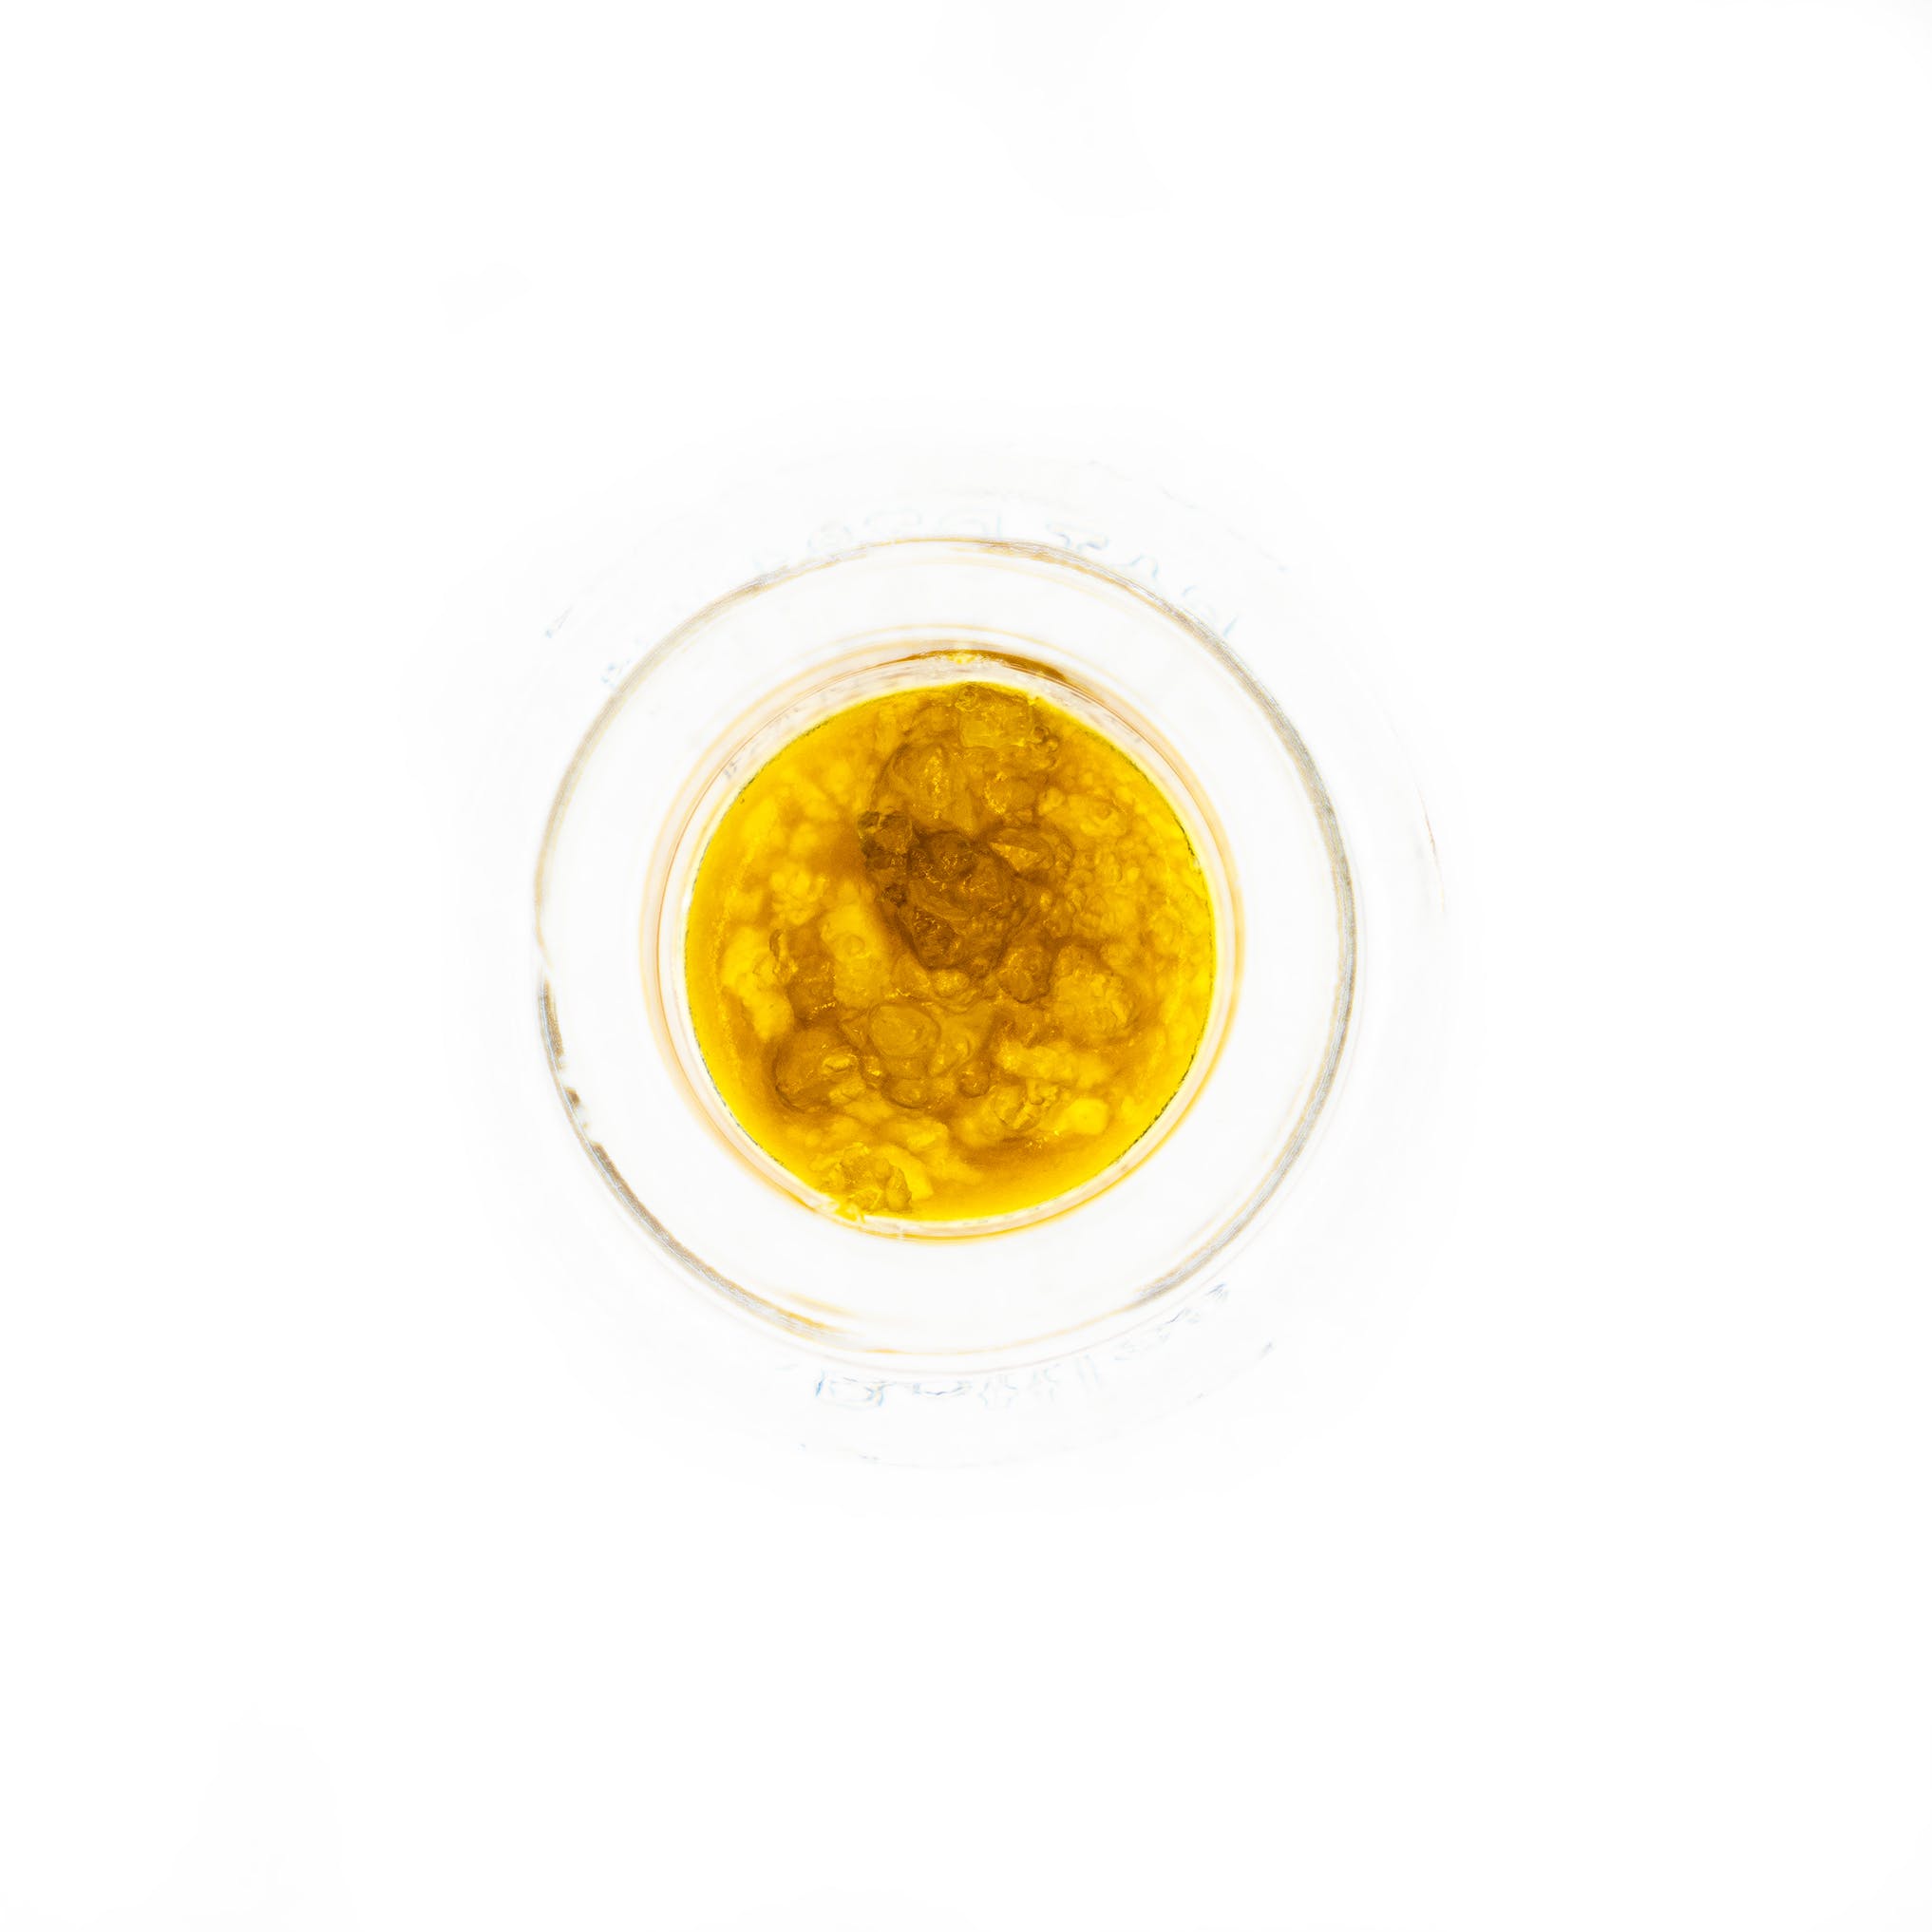 concentrate-buddies-brand-phyco-dawg-live-resin